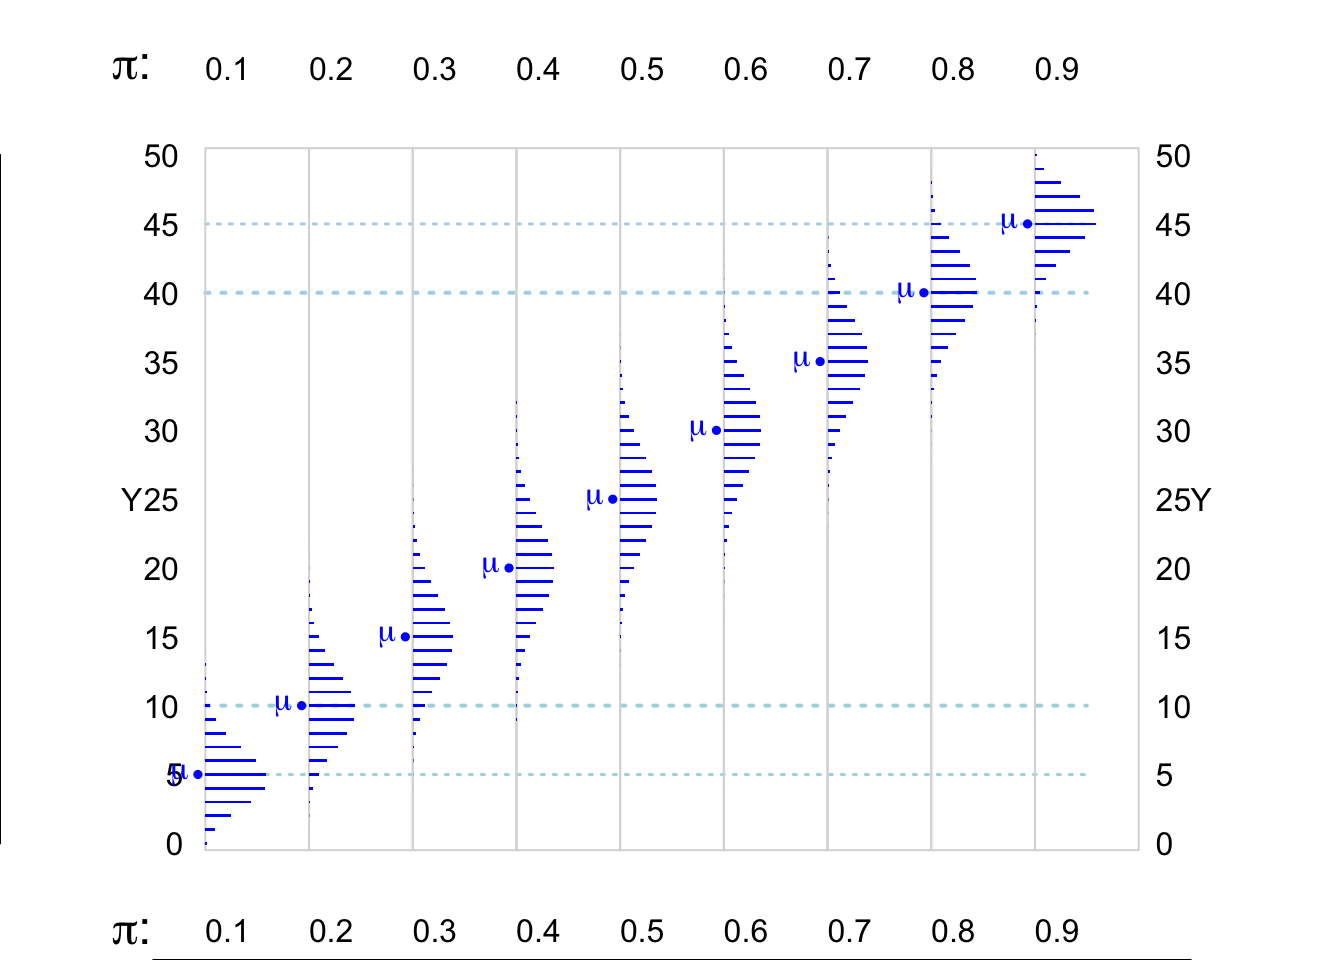 Various Binomial random variables/distributions, where n = 50. The blue dotted lines are 5 and 10 units in from the (0,n) boundaries. The distributions where the expected value E or mean, mu ( = n * Bernoulli Probability) is at least 5 units in from the (0,n) boundaries are shown in blue